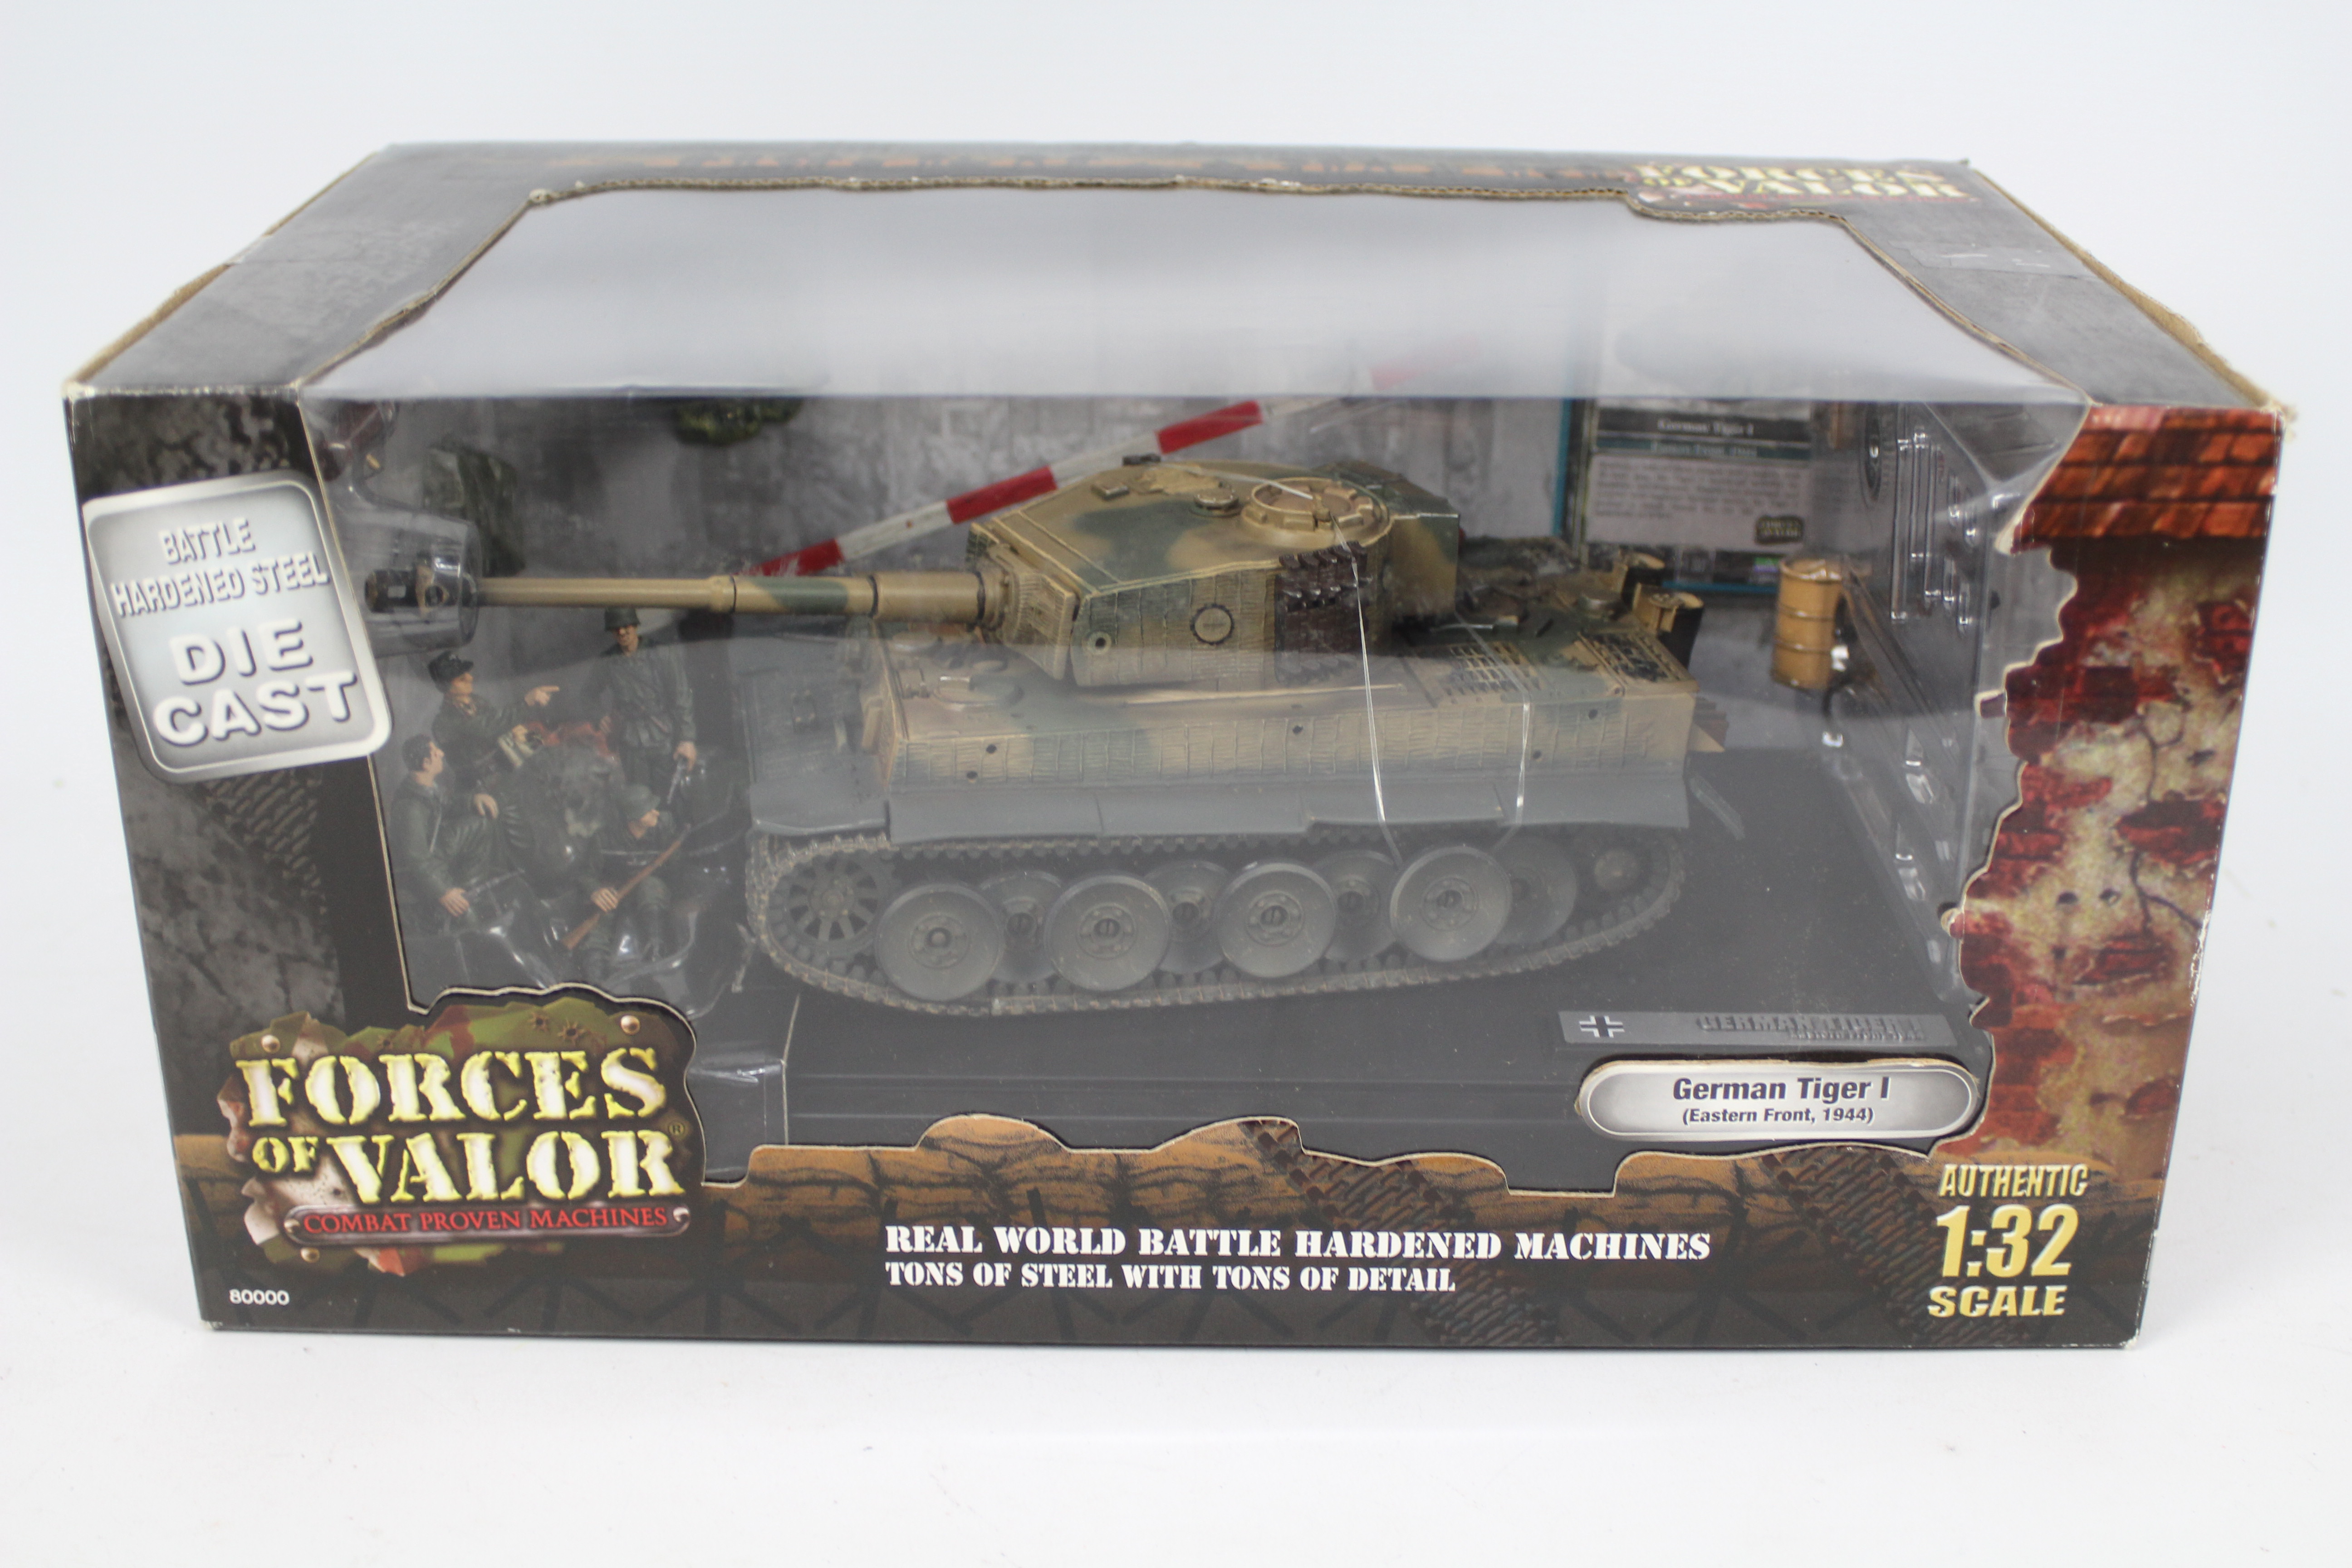 Forces Of Valor - A boxed 1:32 scale German Tiger I Tank, Eastern Front 1944 # 80404.